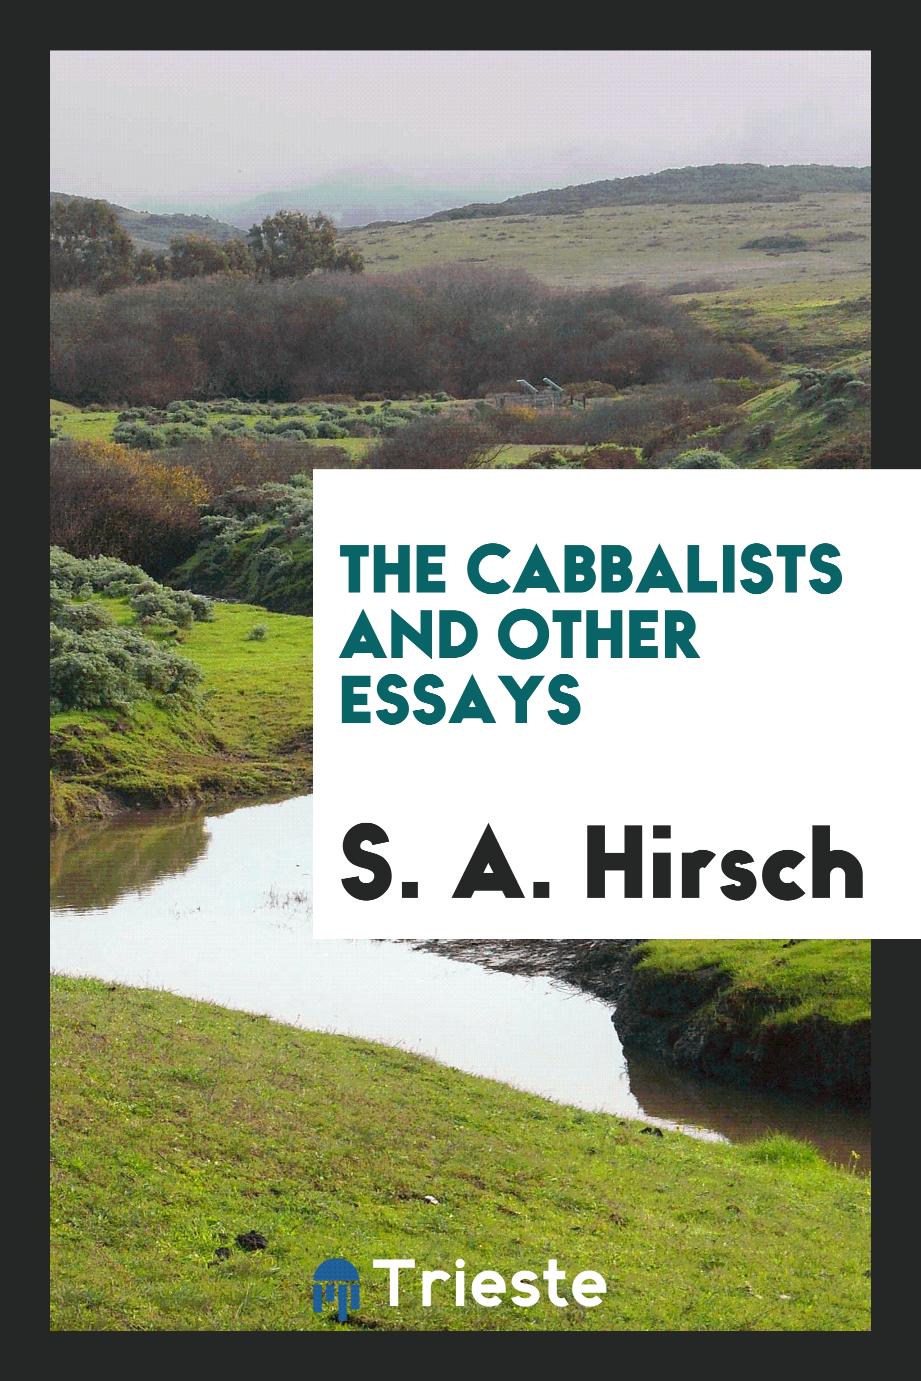 The cabbalists and other essays